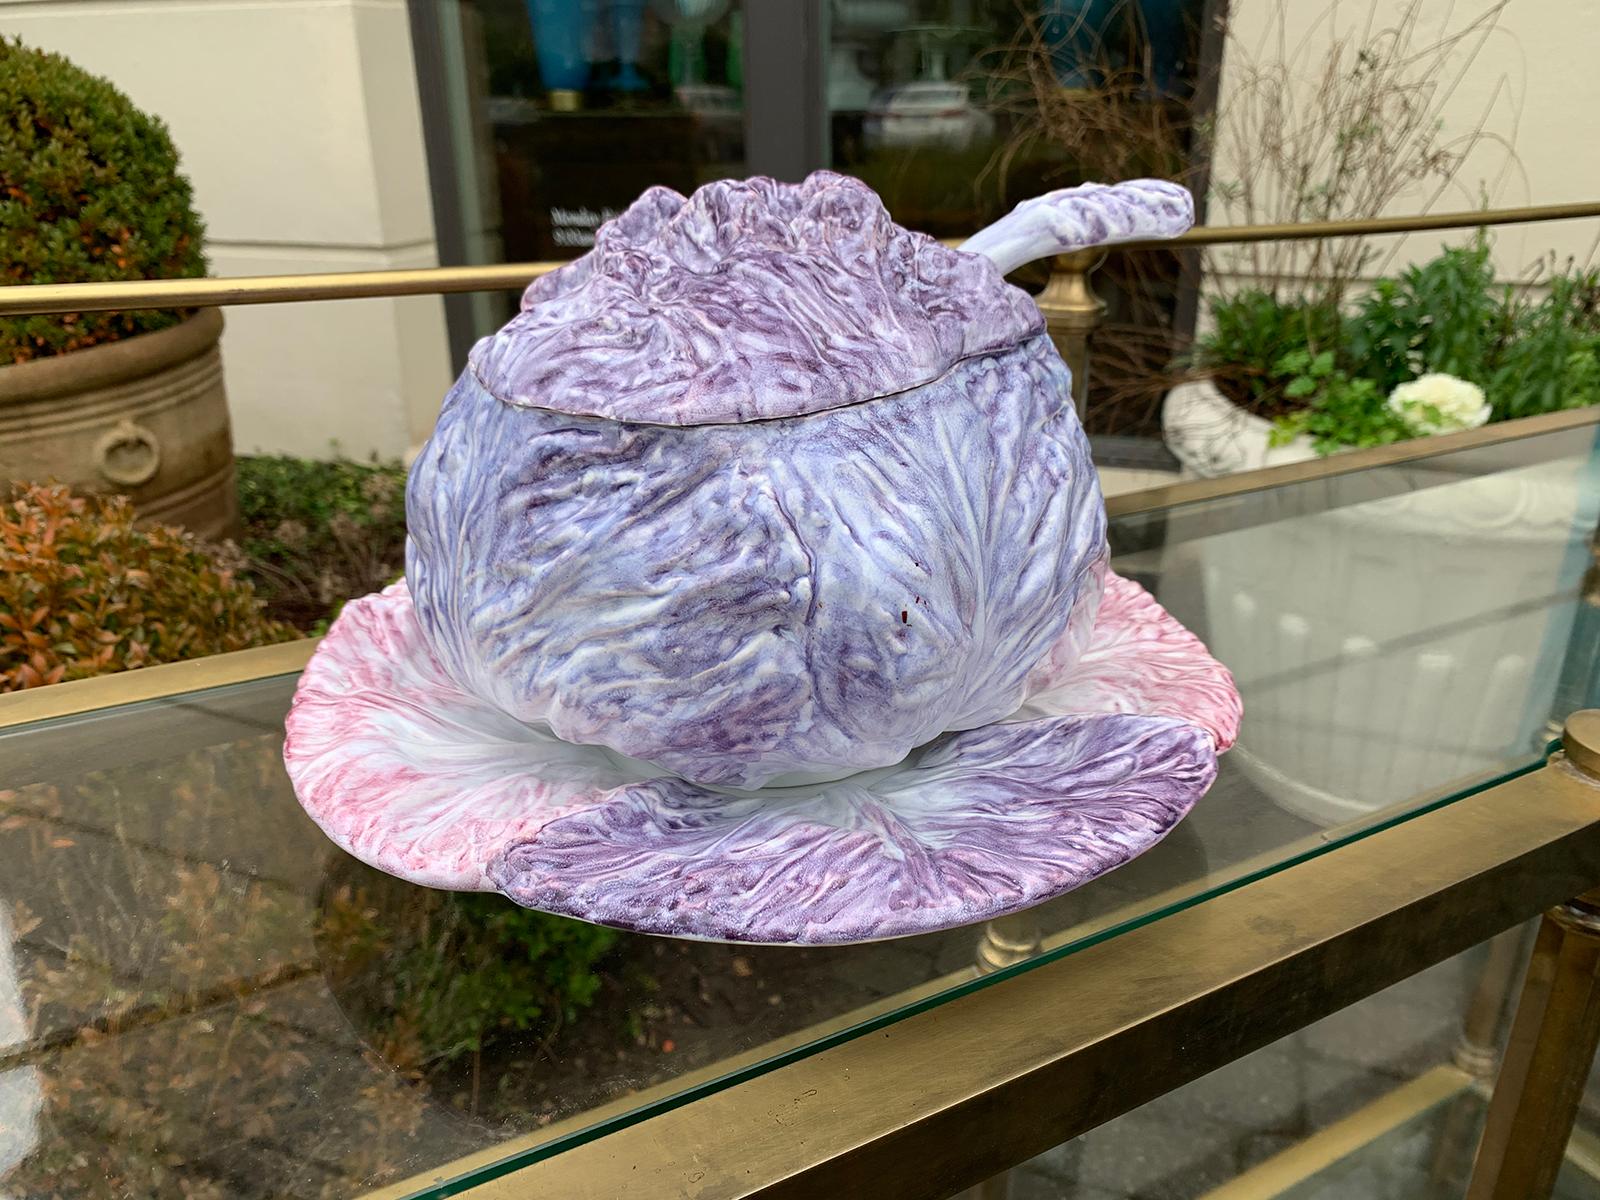 Mid-20th century Italian purple porcelain cabbage tureen with underplate and ladle
Marked 'Made in Italy'.